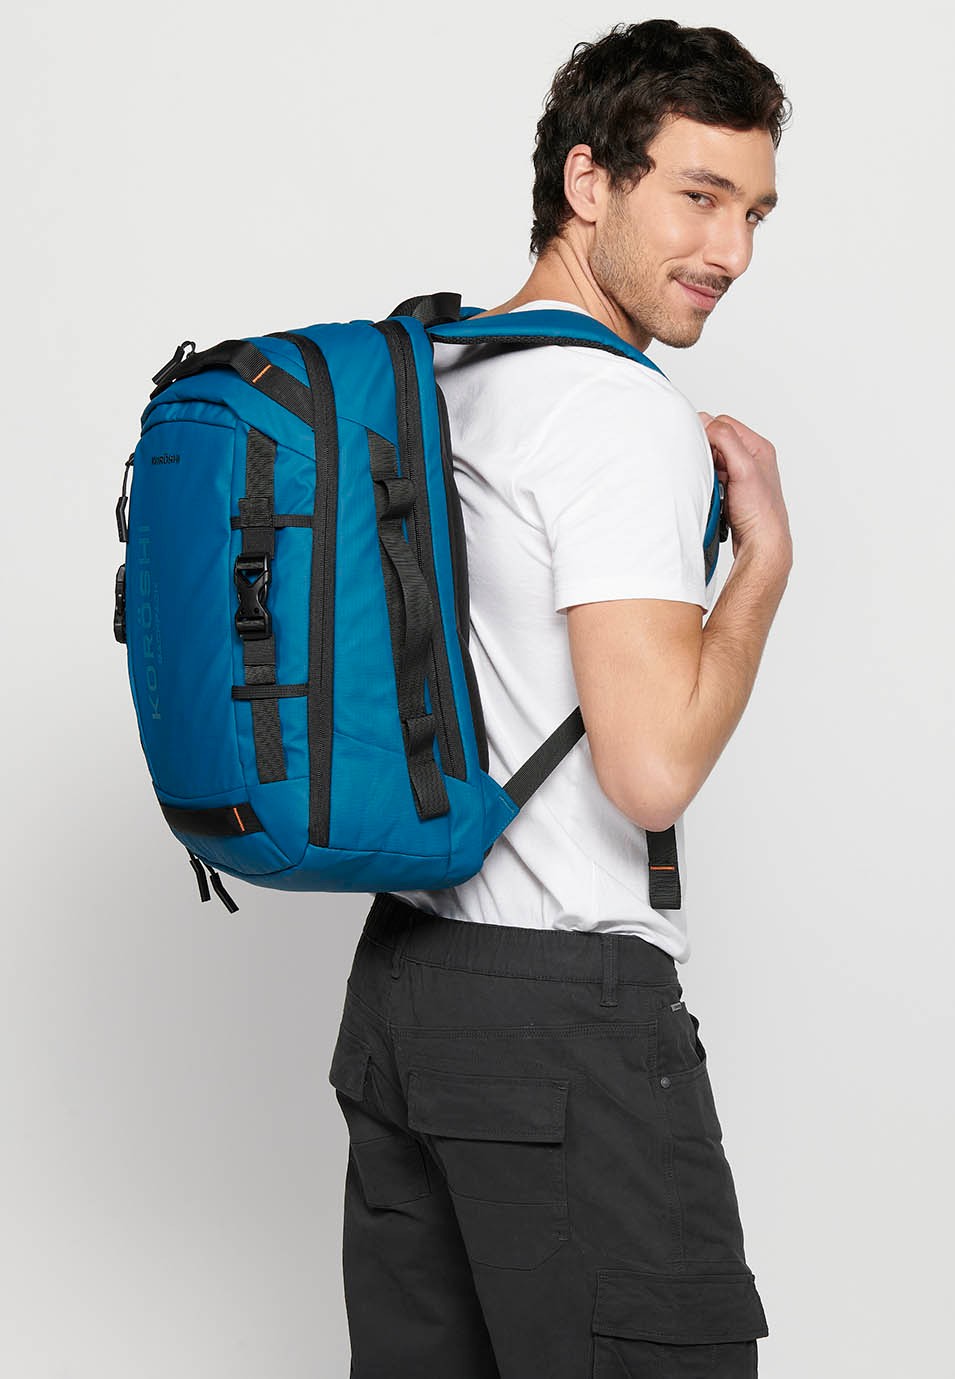 Koröshi backpack with two zippered compartments, one for a laptop and adjustable straps in Blue 7